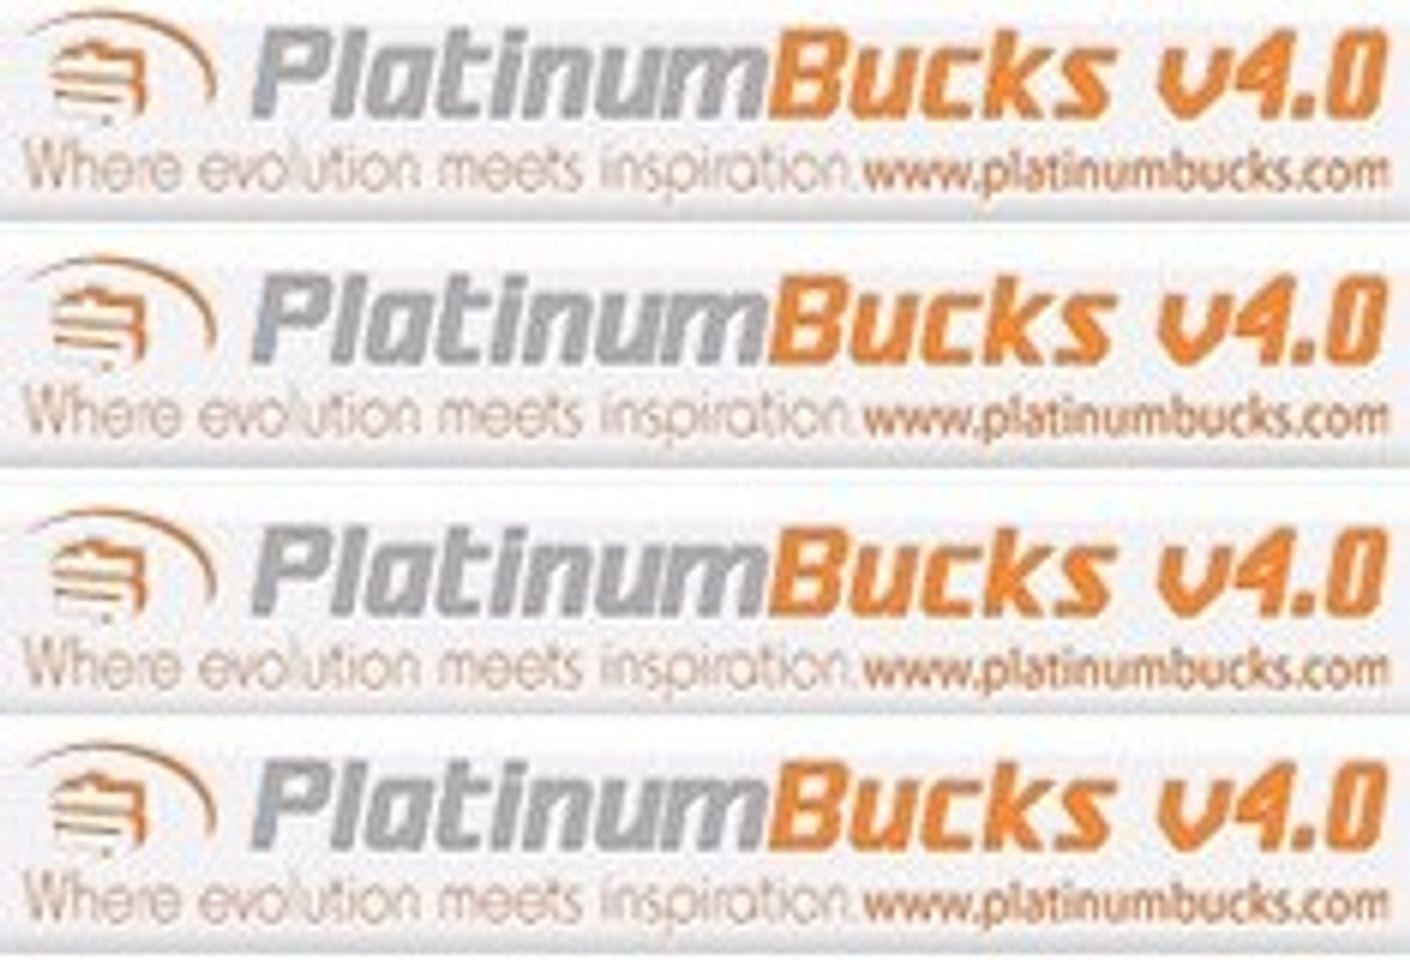 Platinum Bucks Launches Five Discount Sites, Announces Year of Giveaways